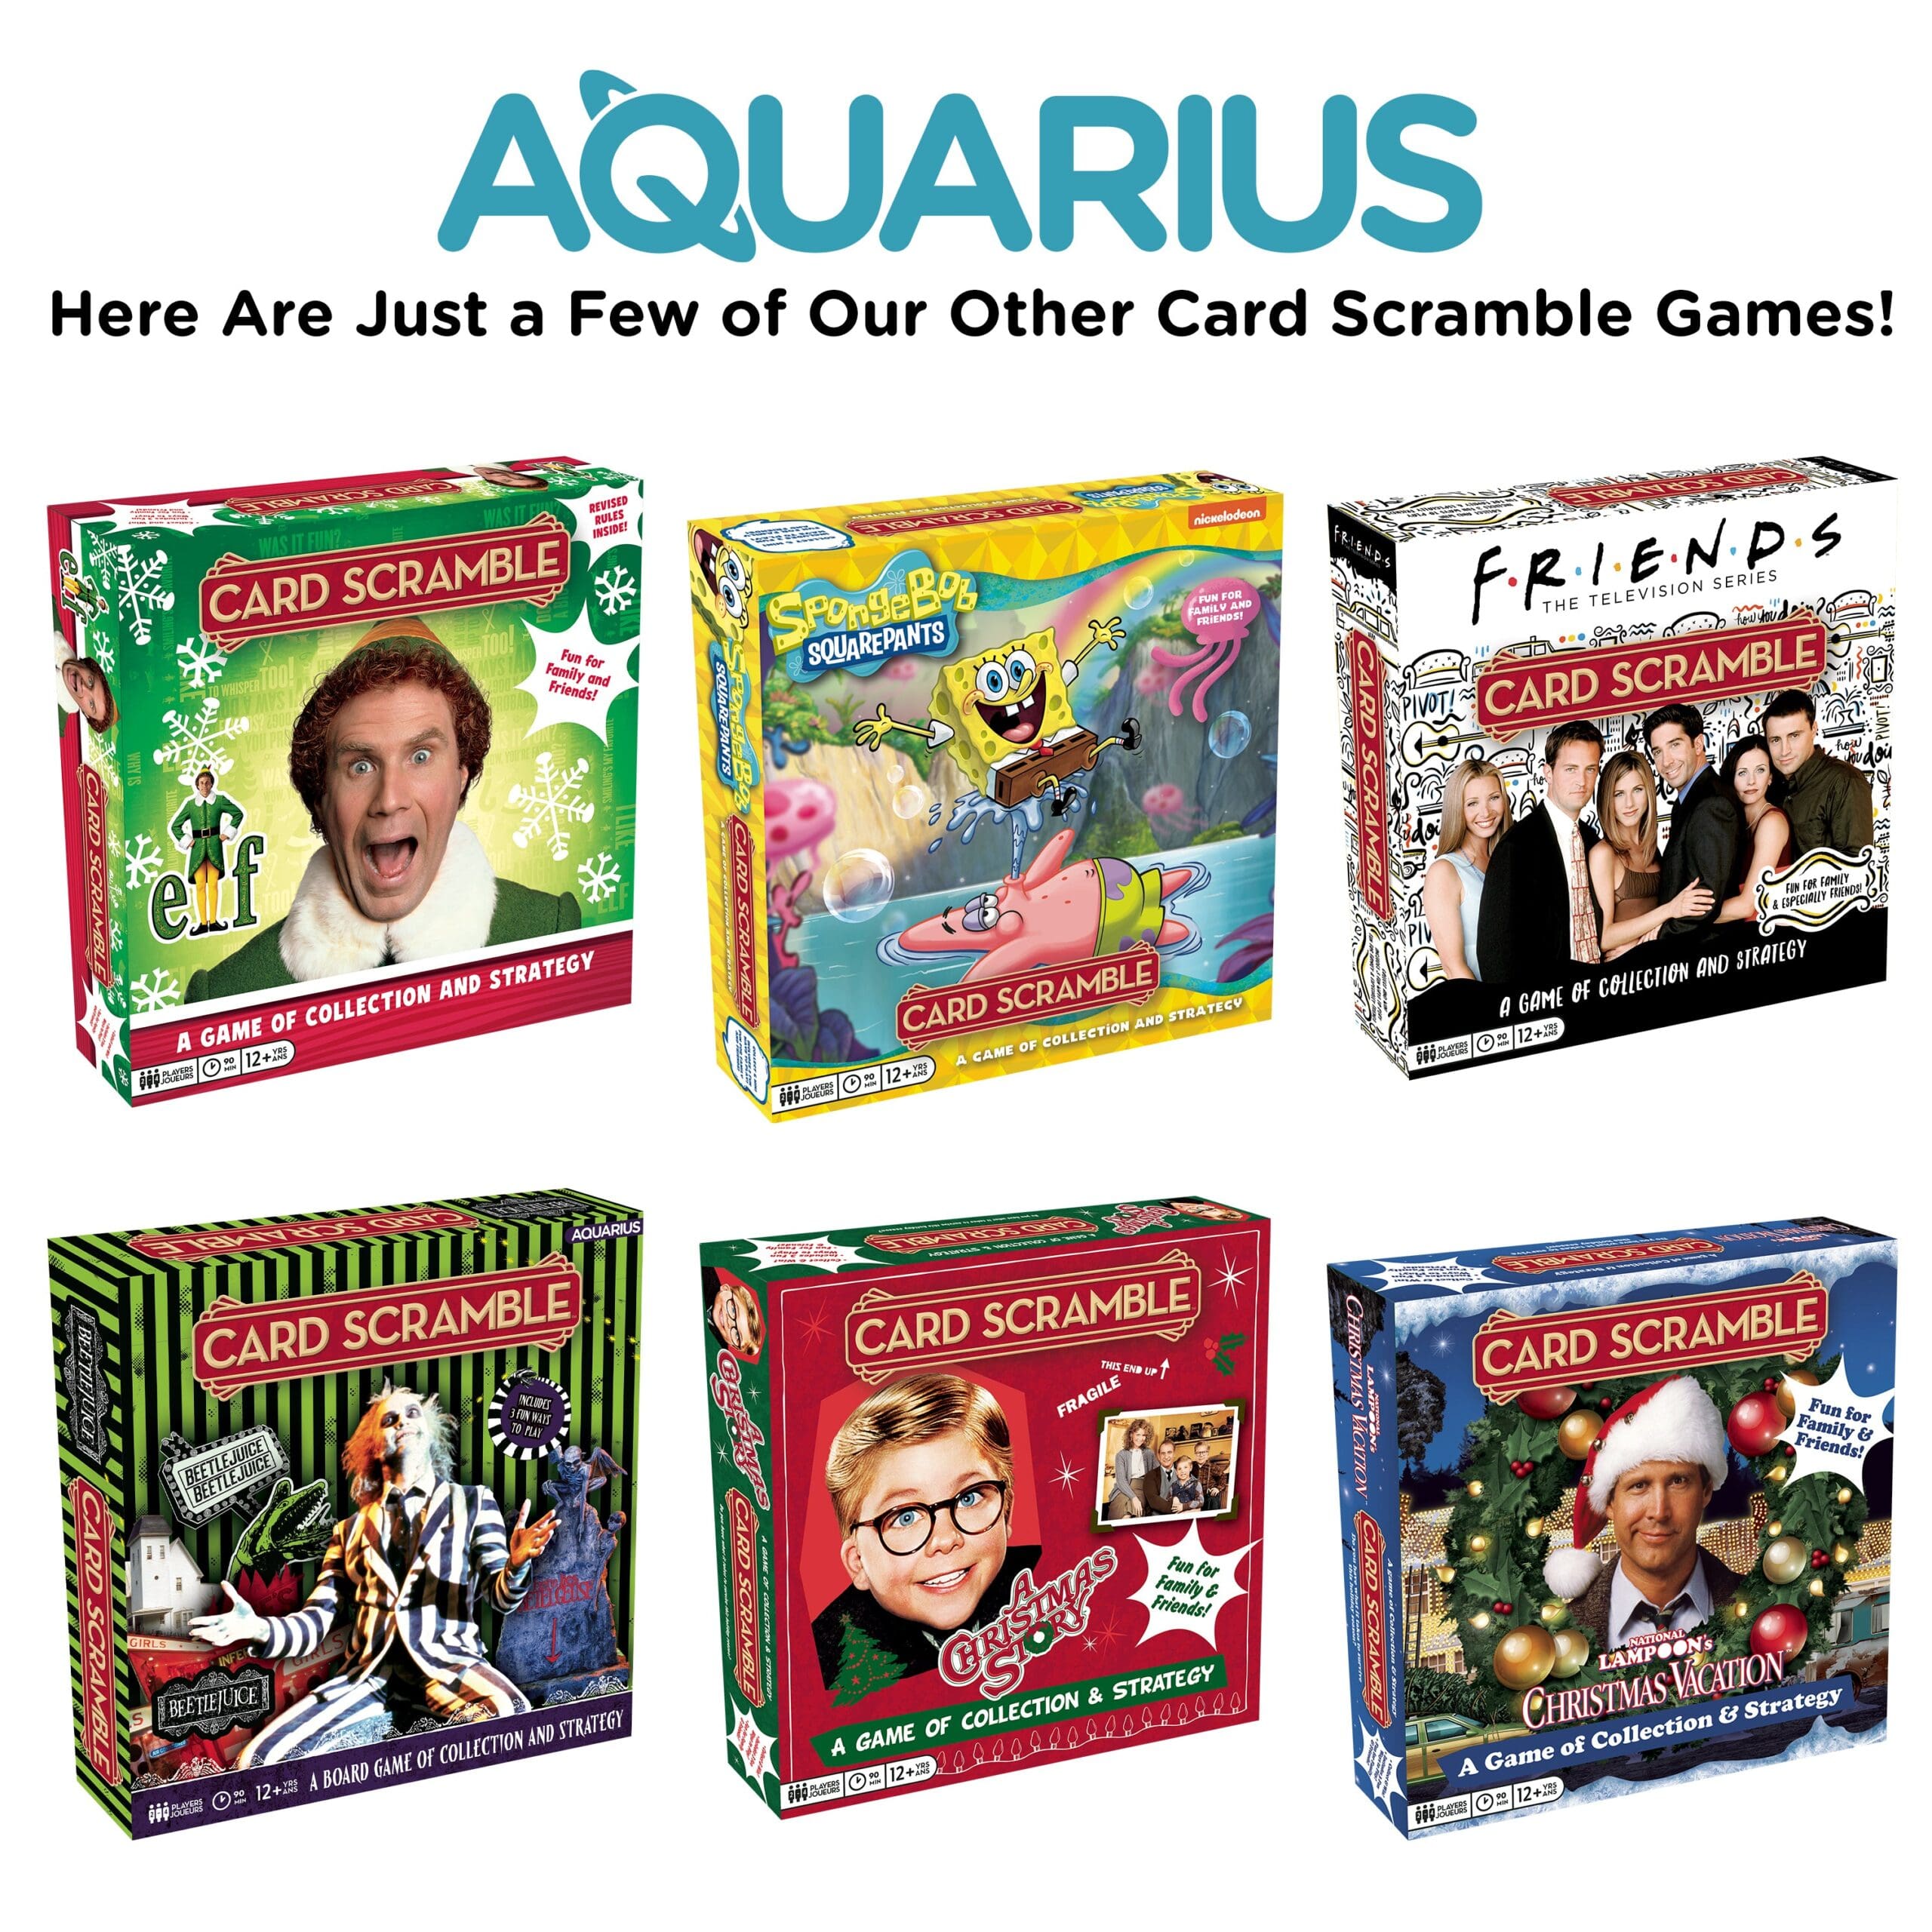 Tuesday 13 card game/board game/group game/officially licensed